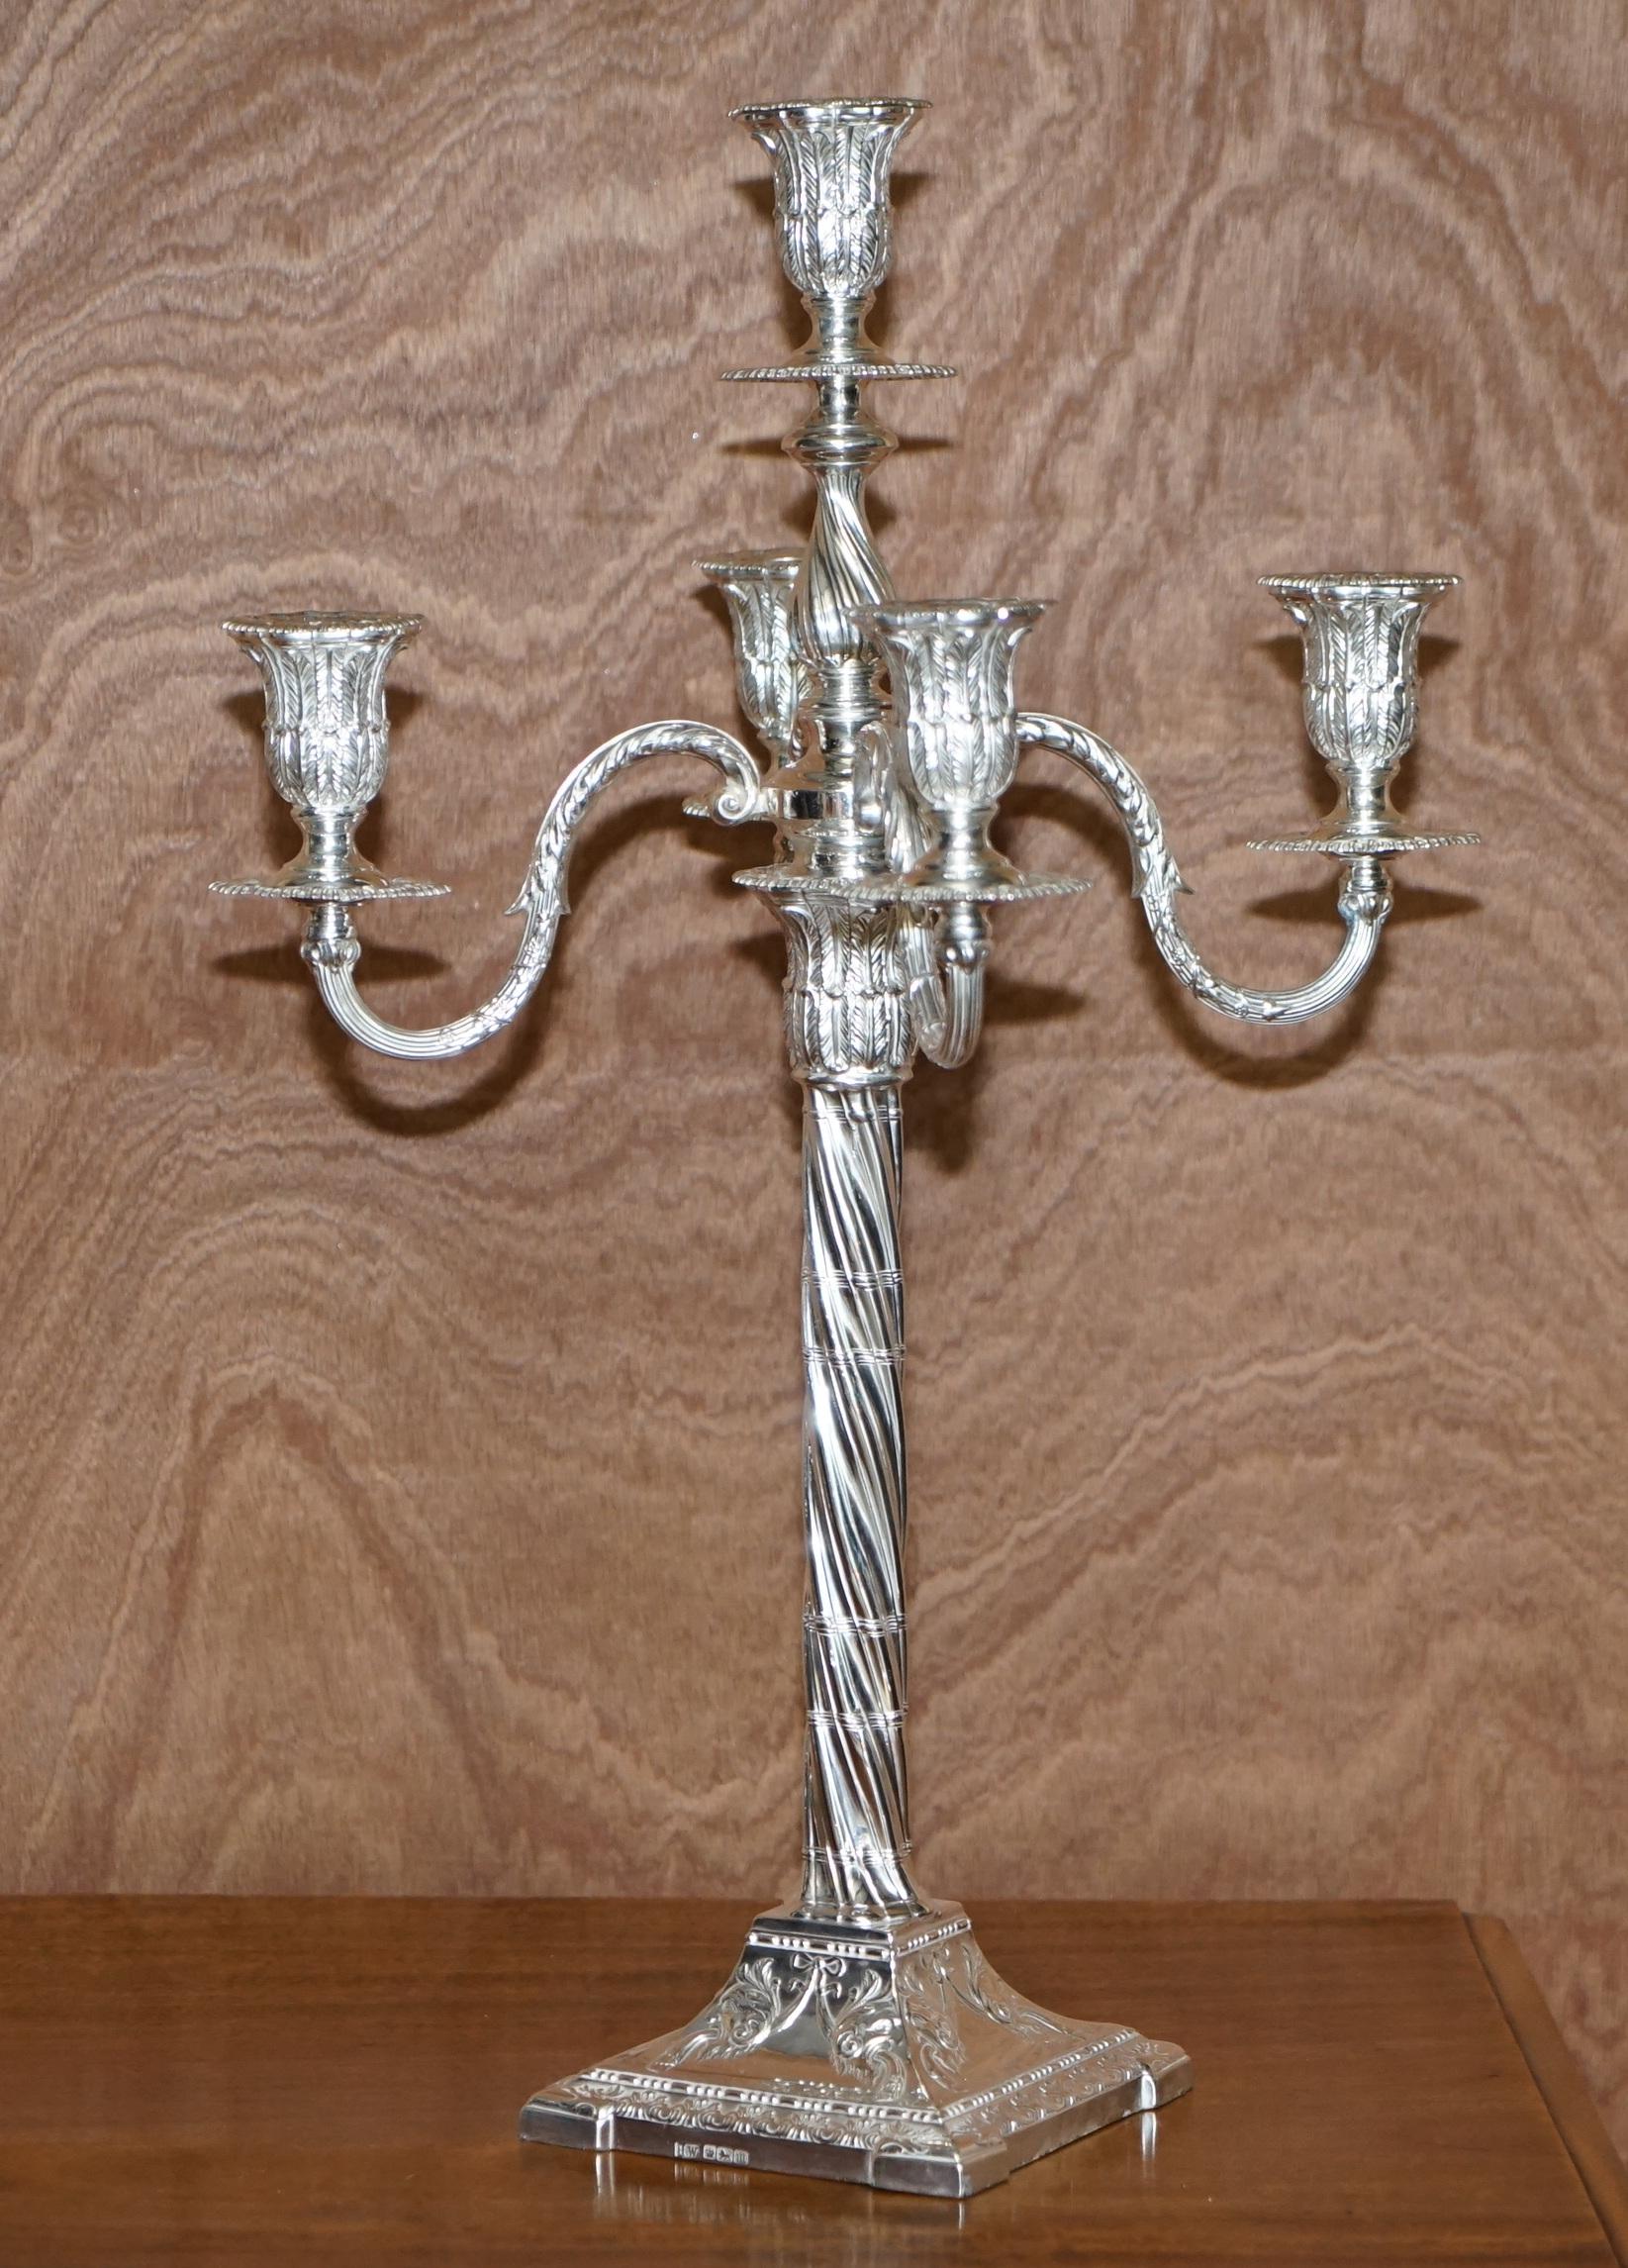 We are delighted to offer for sale this sublime pair of fully restored, very decorative and important original Henry Wigfull 1904 solid sterling silver Candelabra.

These are a pair of Edward VII Sterling Silver five-light Candelabra, by Henry